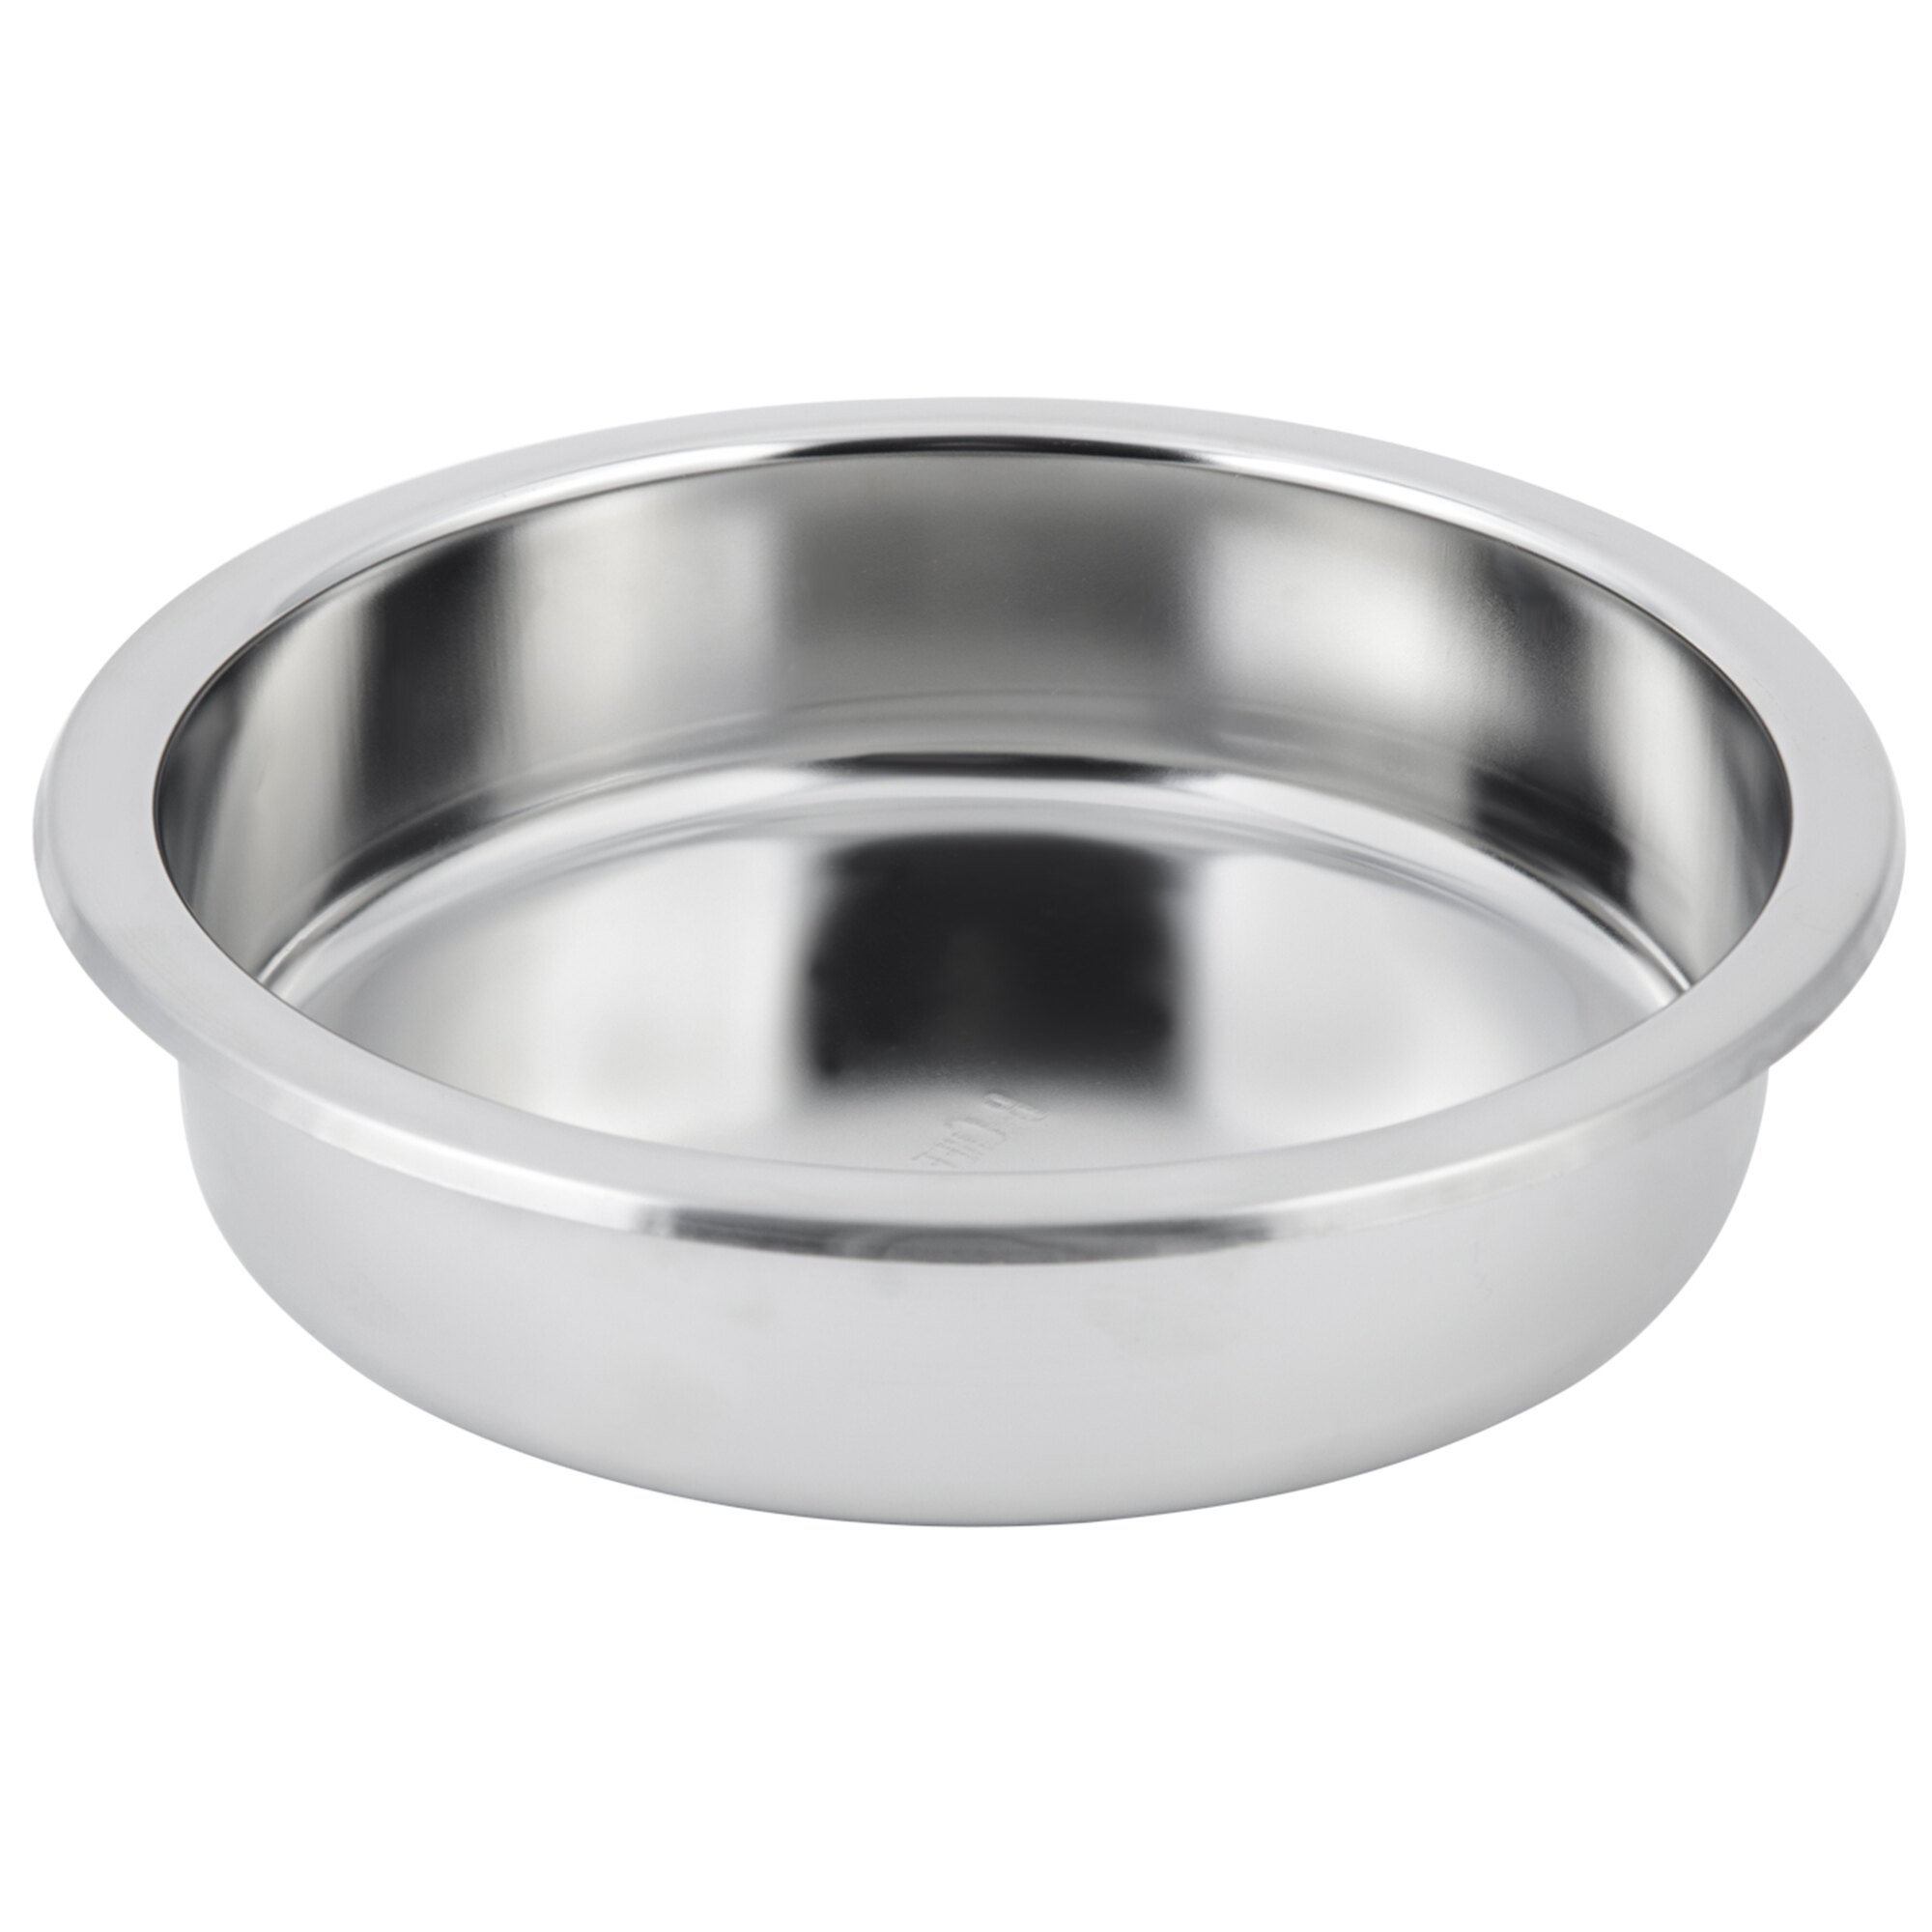 Bon Chef 12021 3 Qt. Small Rounded Stainless Steel Food Pan - 2 1/2